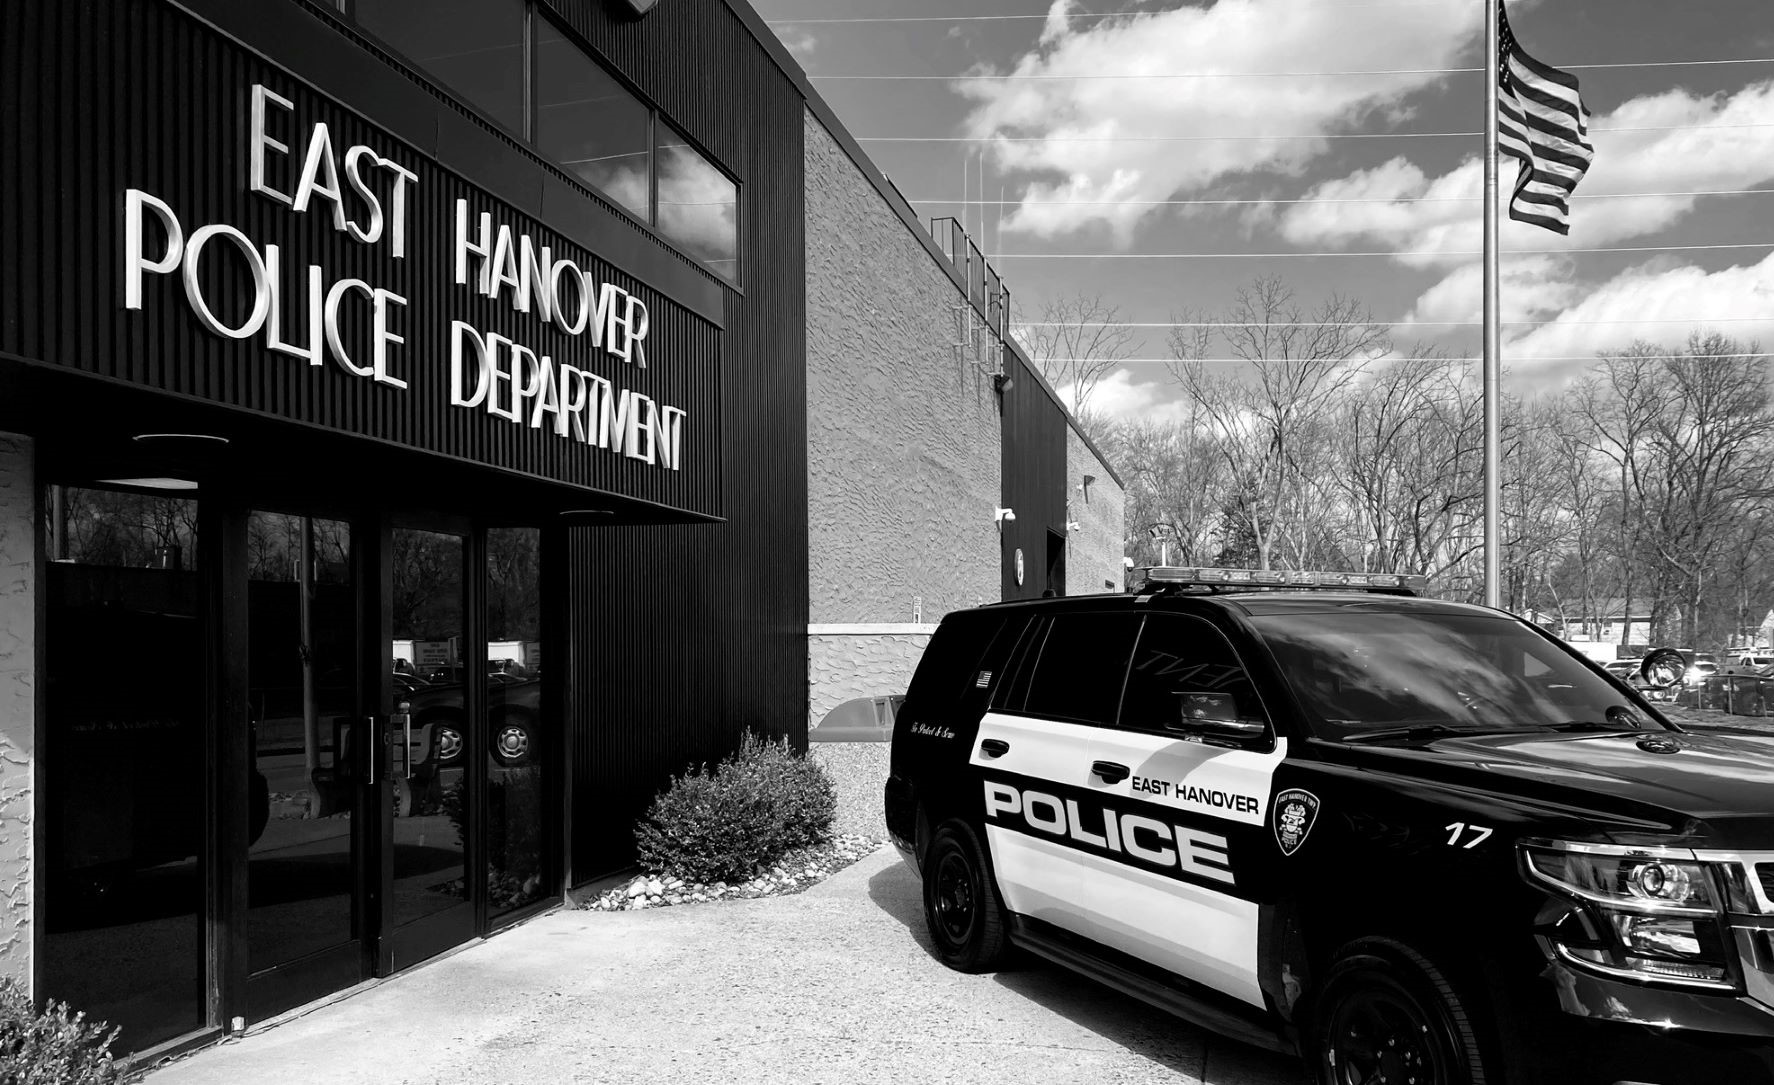 East Hanover Township Police Department, NJ Police Jobs